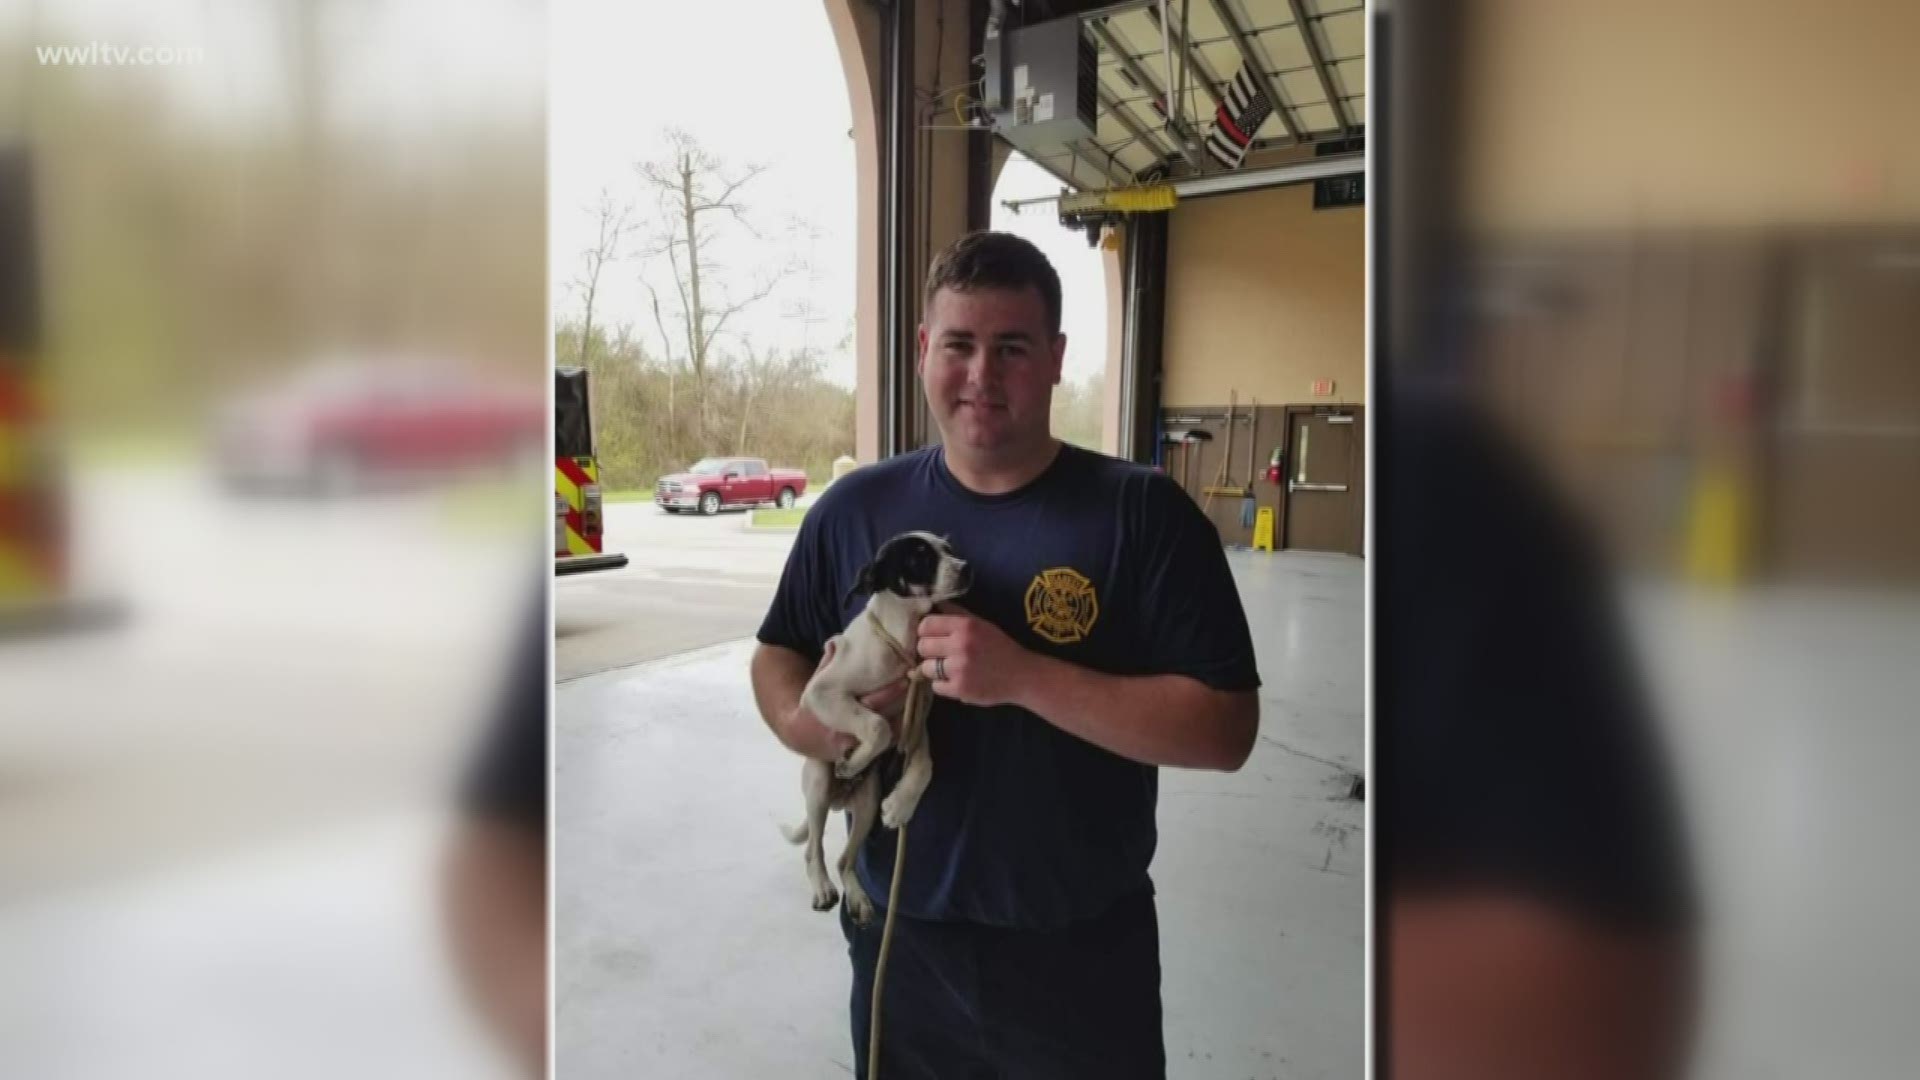 Here's some good news to talk about: A puppy is safe thanks to Harvey volunteer firefighters.